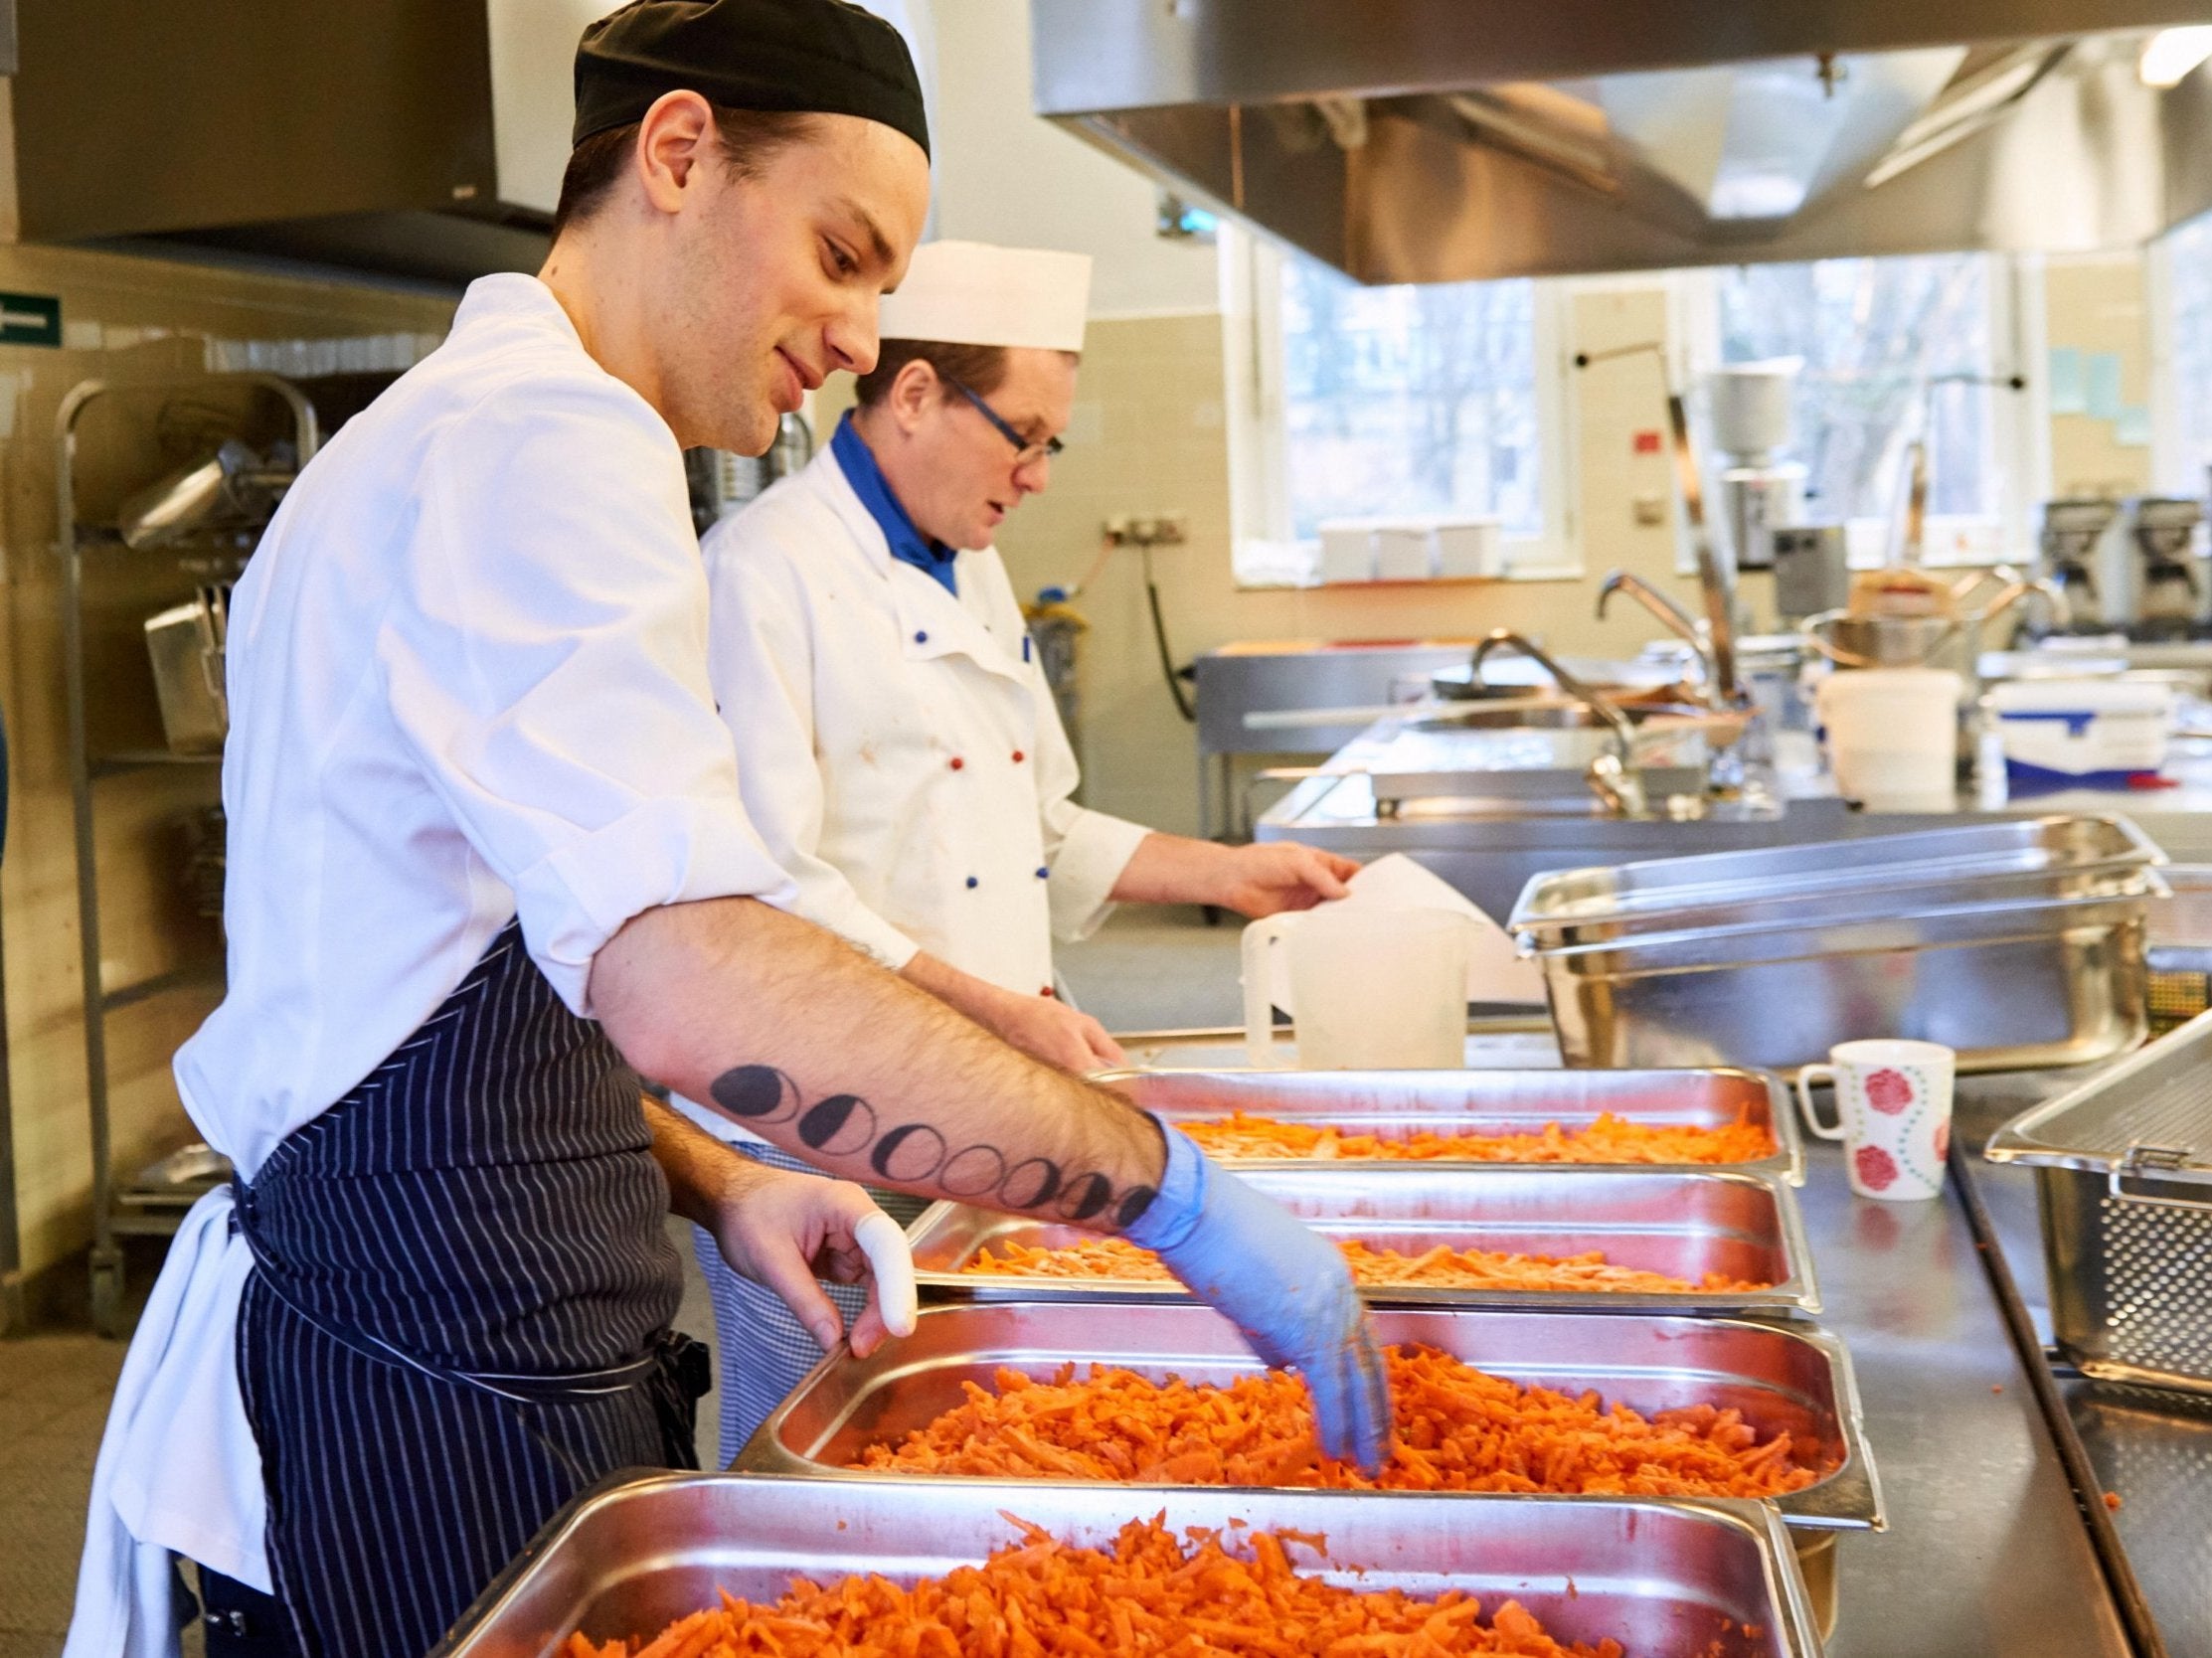 Chef Patrick Wodni helps prepare one of his many healthy dishes at Havelhöhe hospital